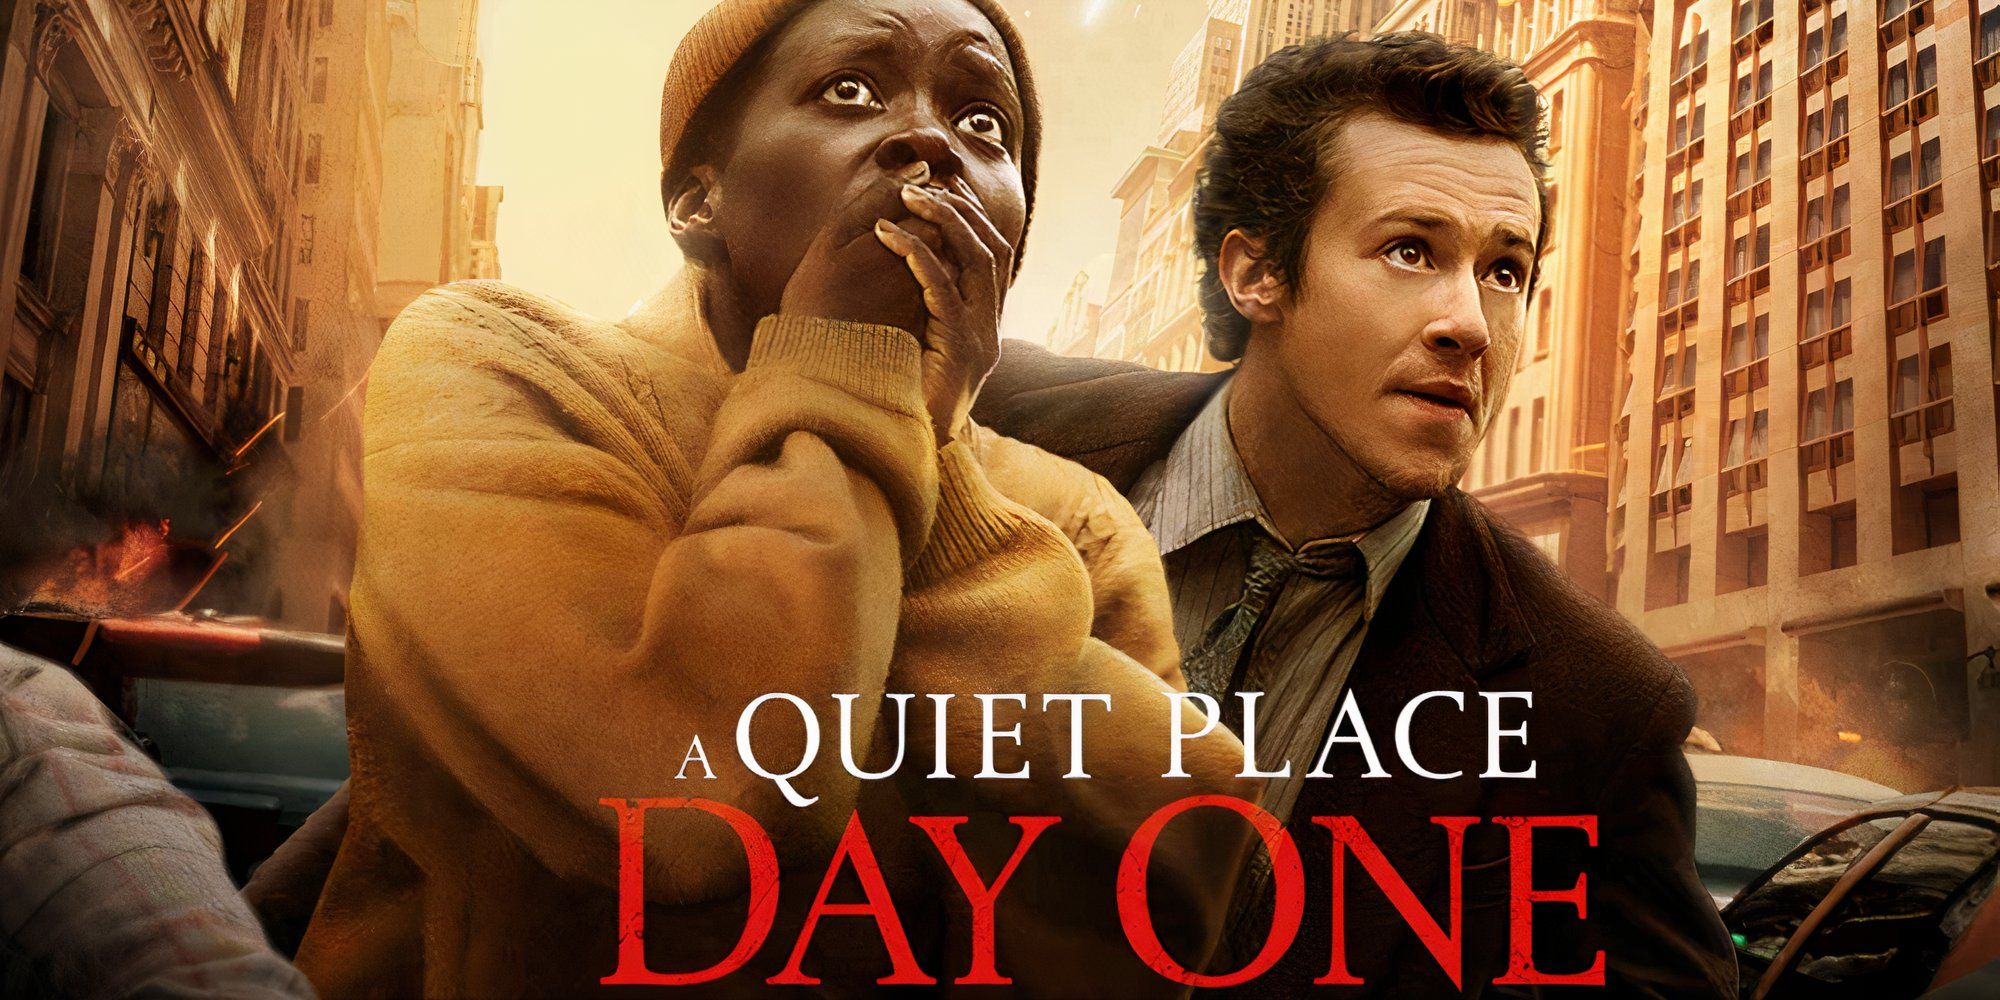 A-Quiet-Place-Day-One title card